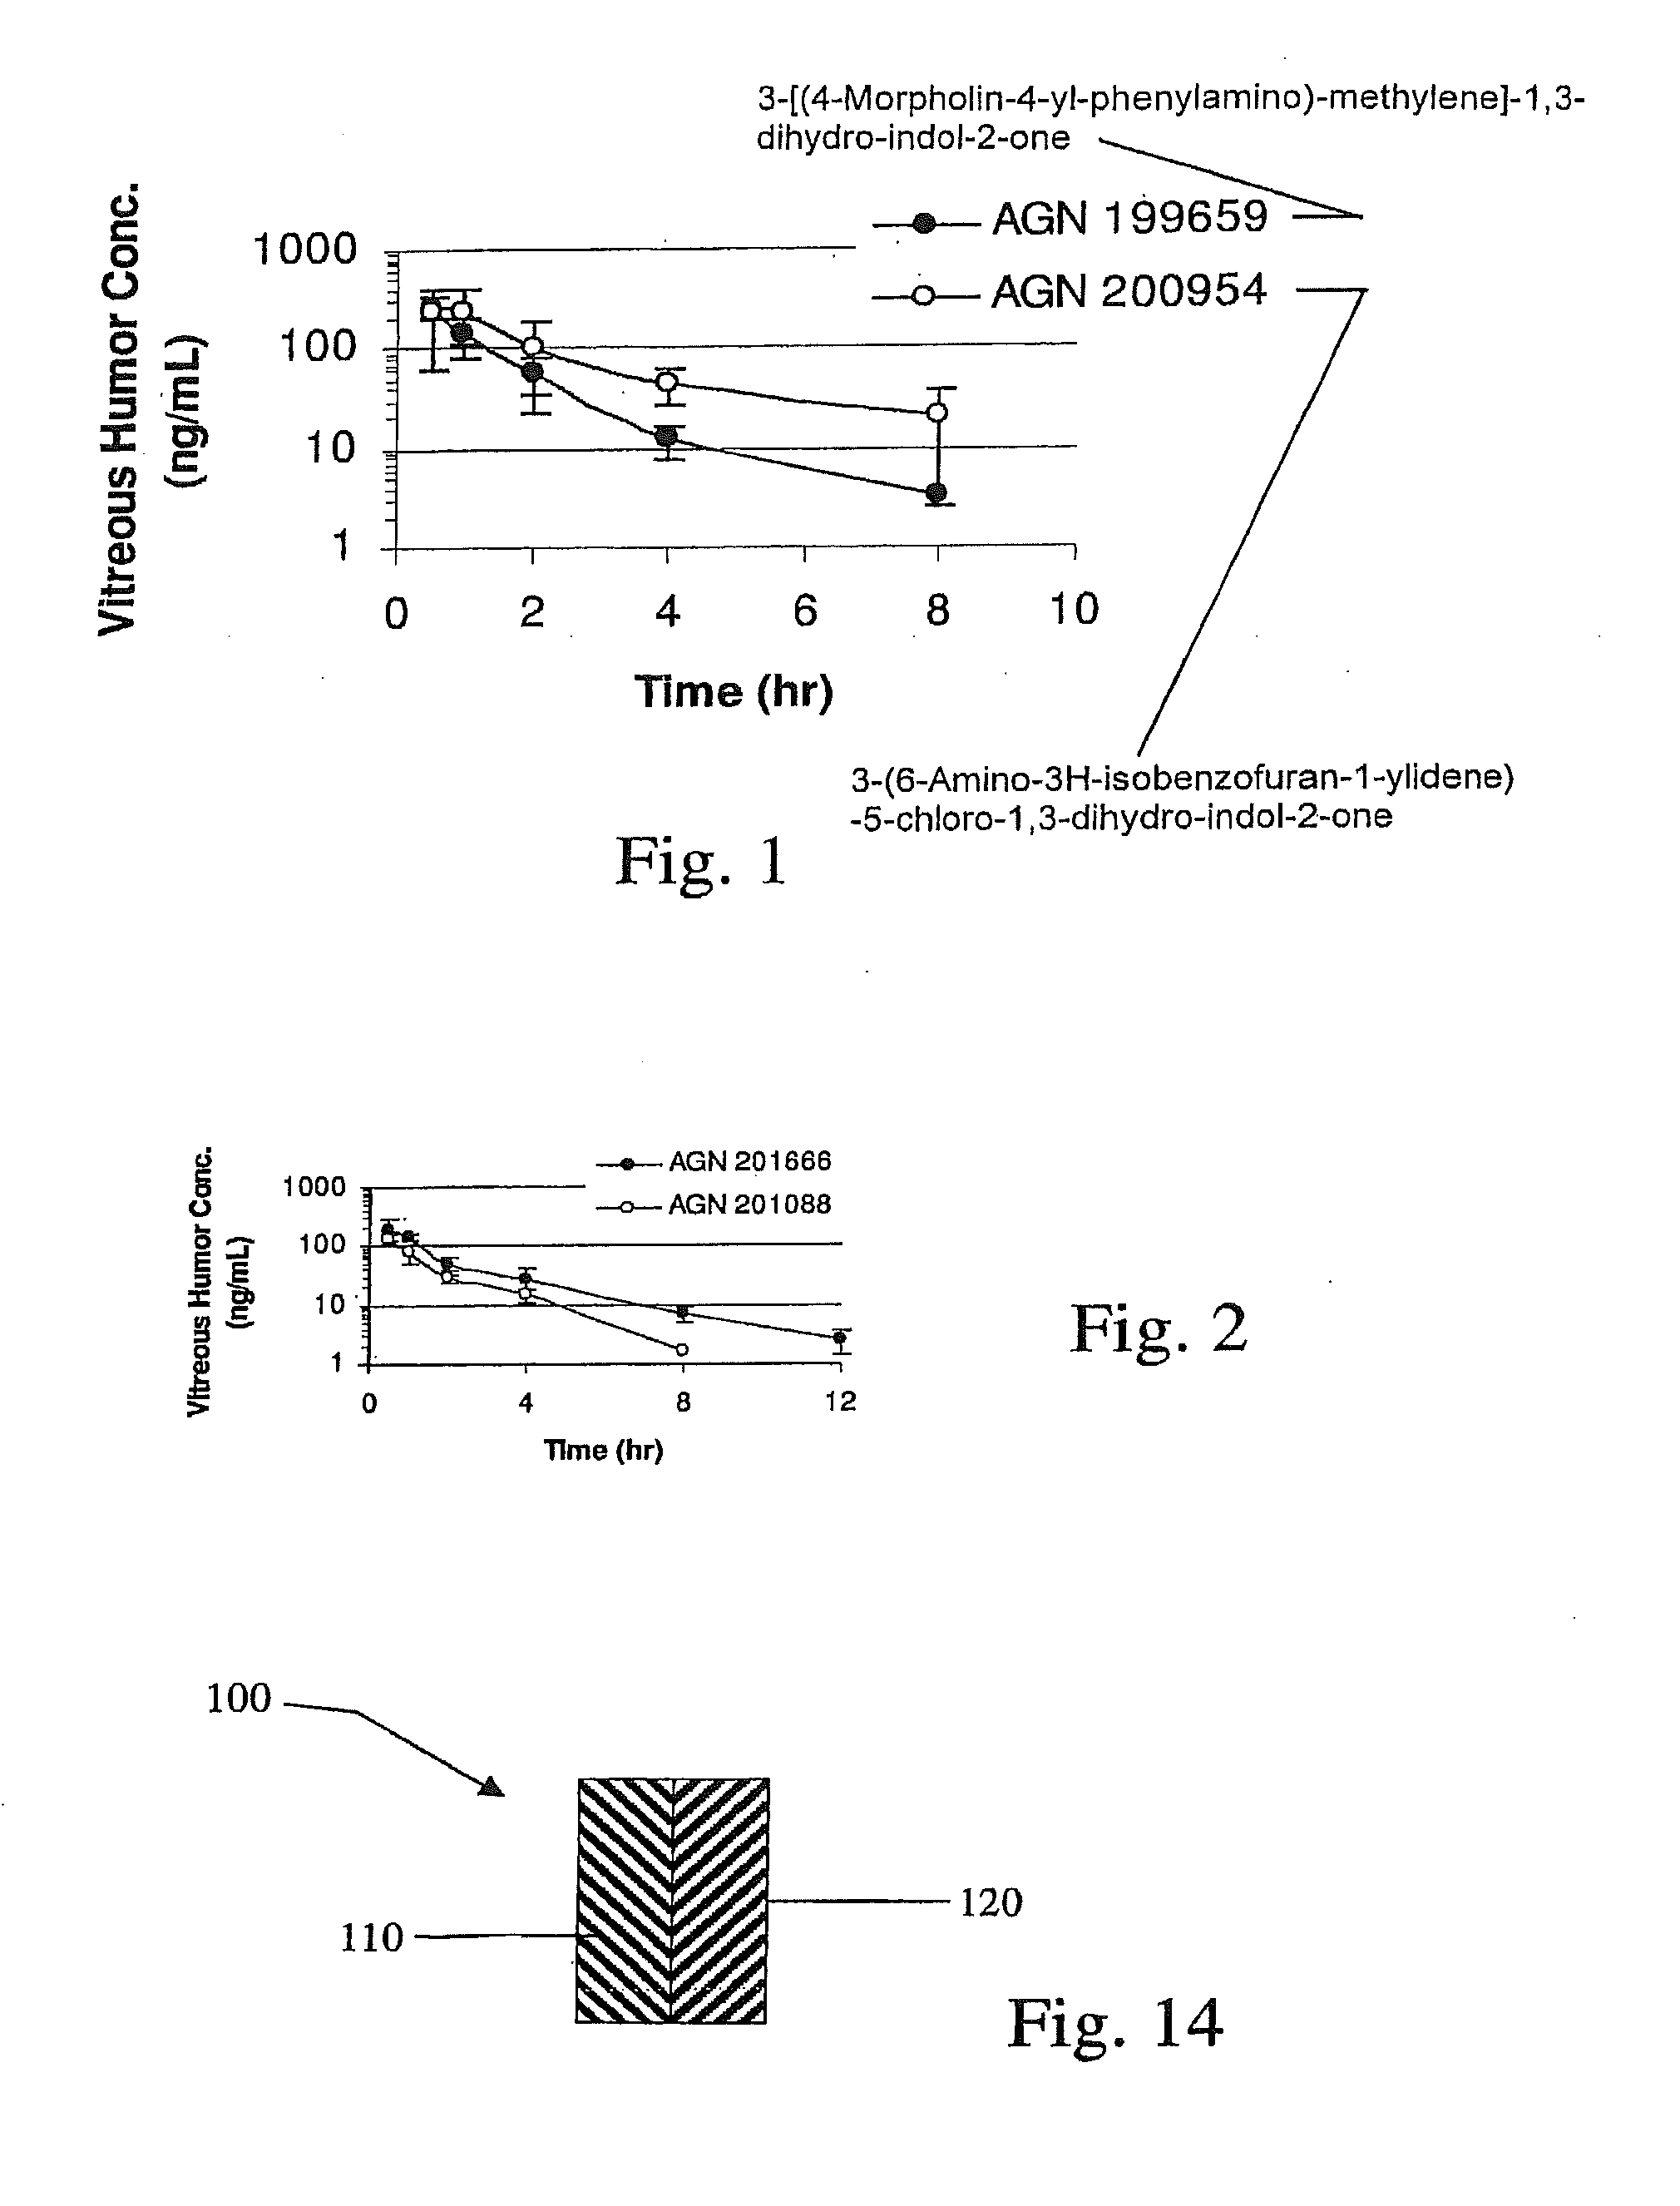 Sustained release intraocular implants containing tyrosine kinase inhibitors and related methods